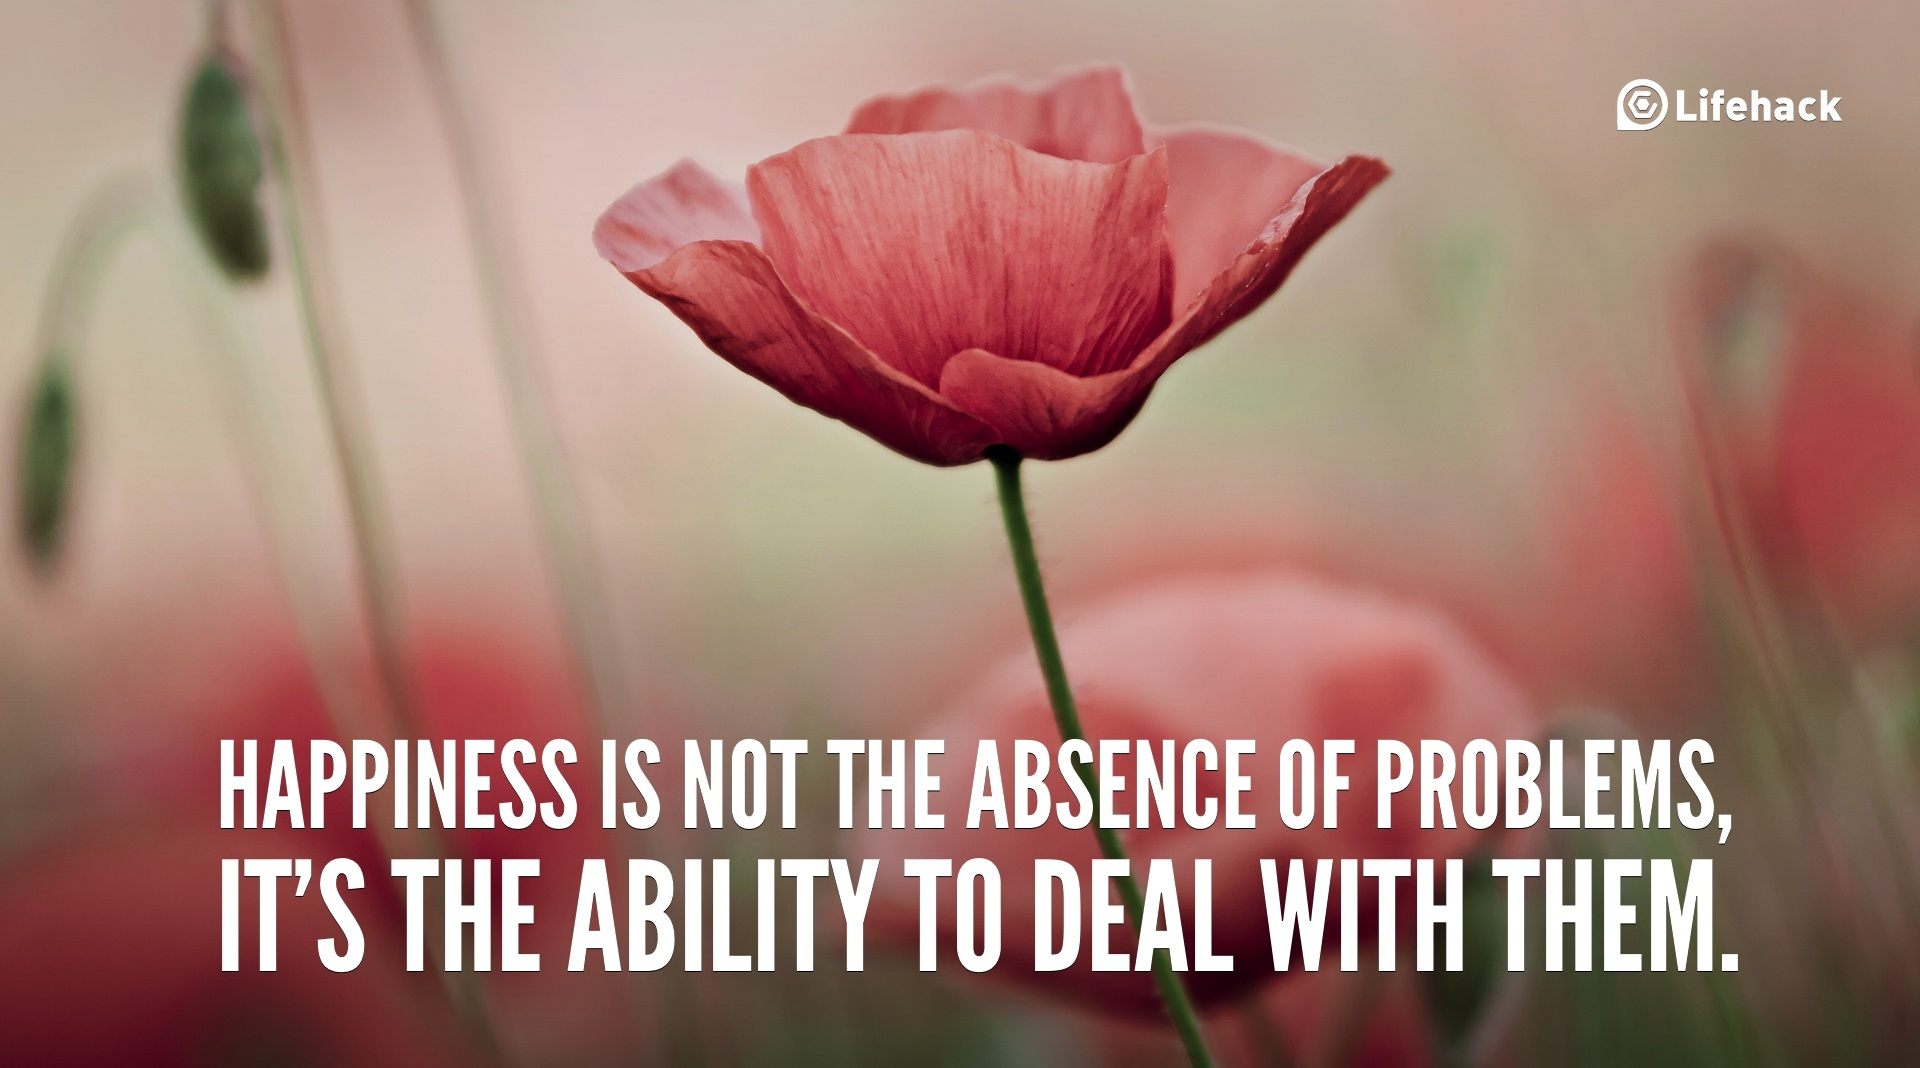 30sec Tip: Happiness is not the Absence of Problems